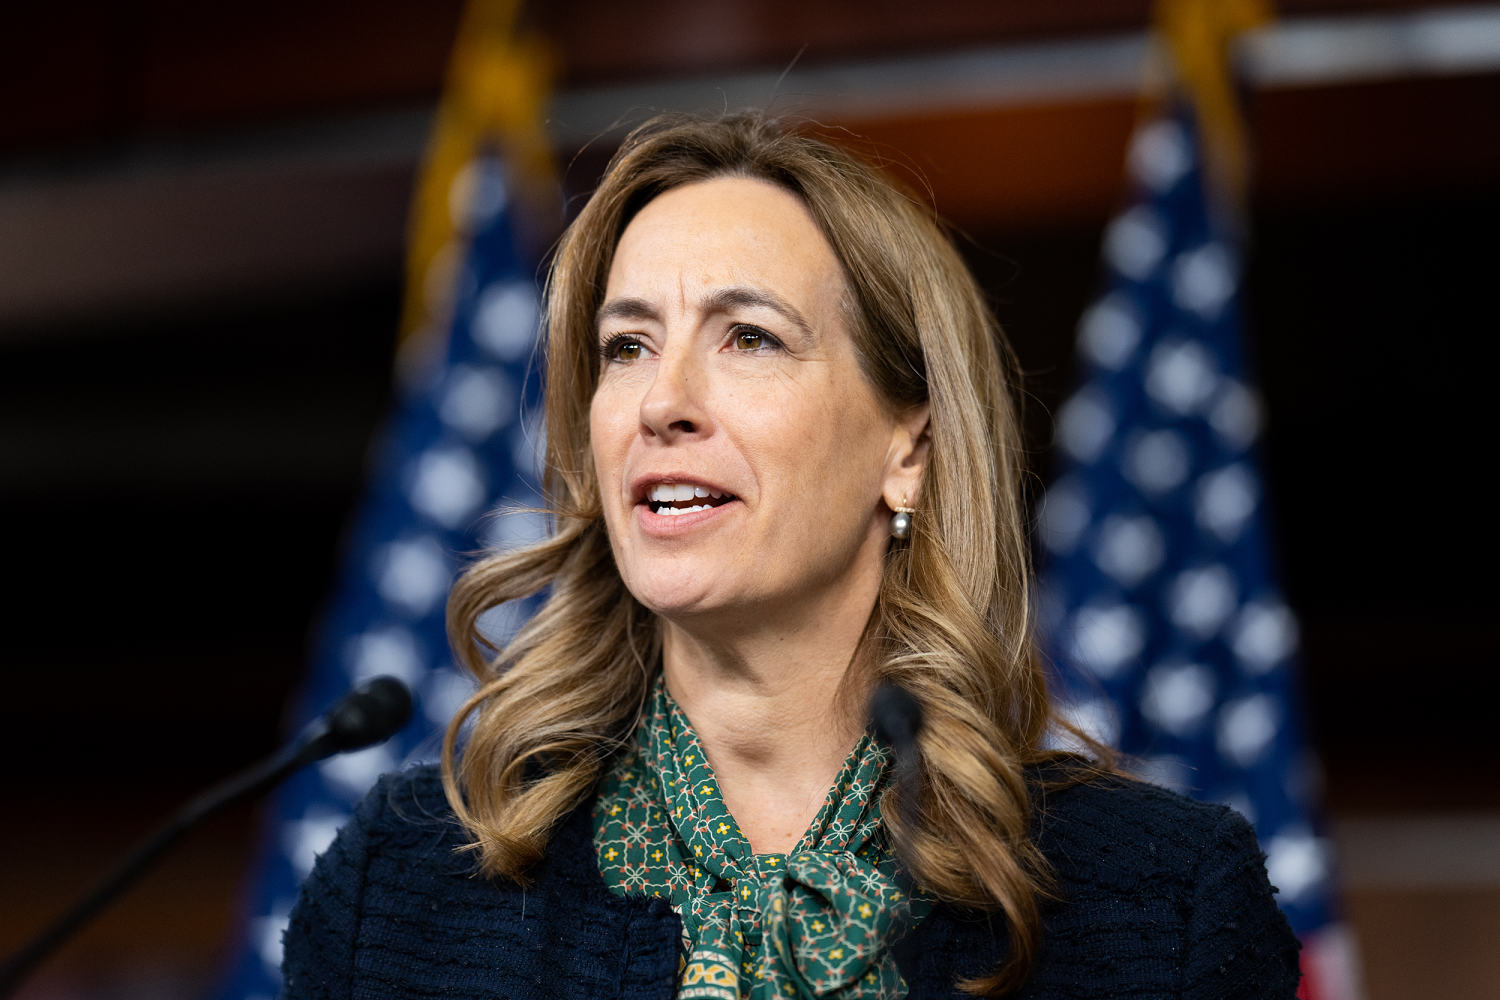 Democratic Rep. Mikie Sherrill of New Jersey calls on Biden to drop out of race